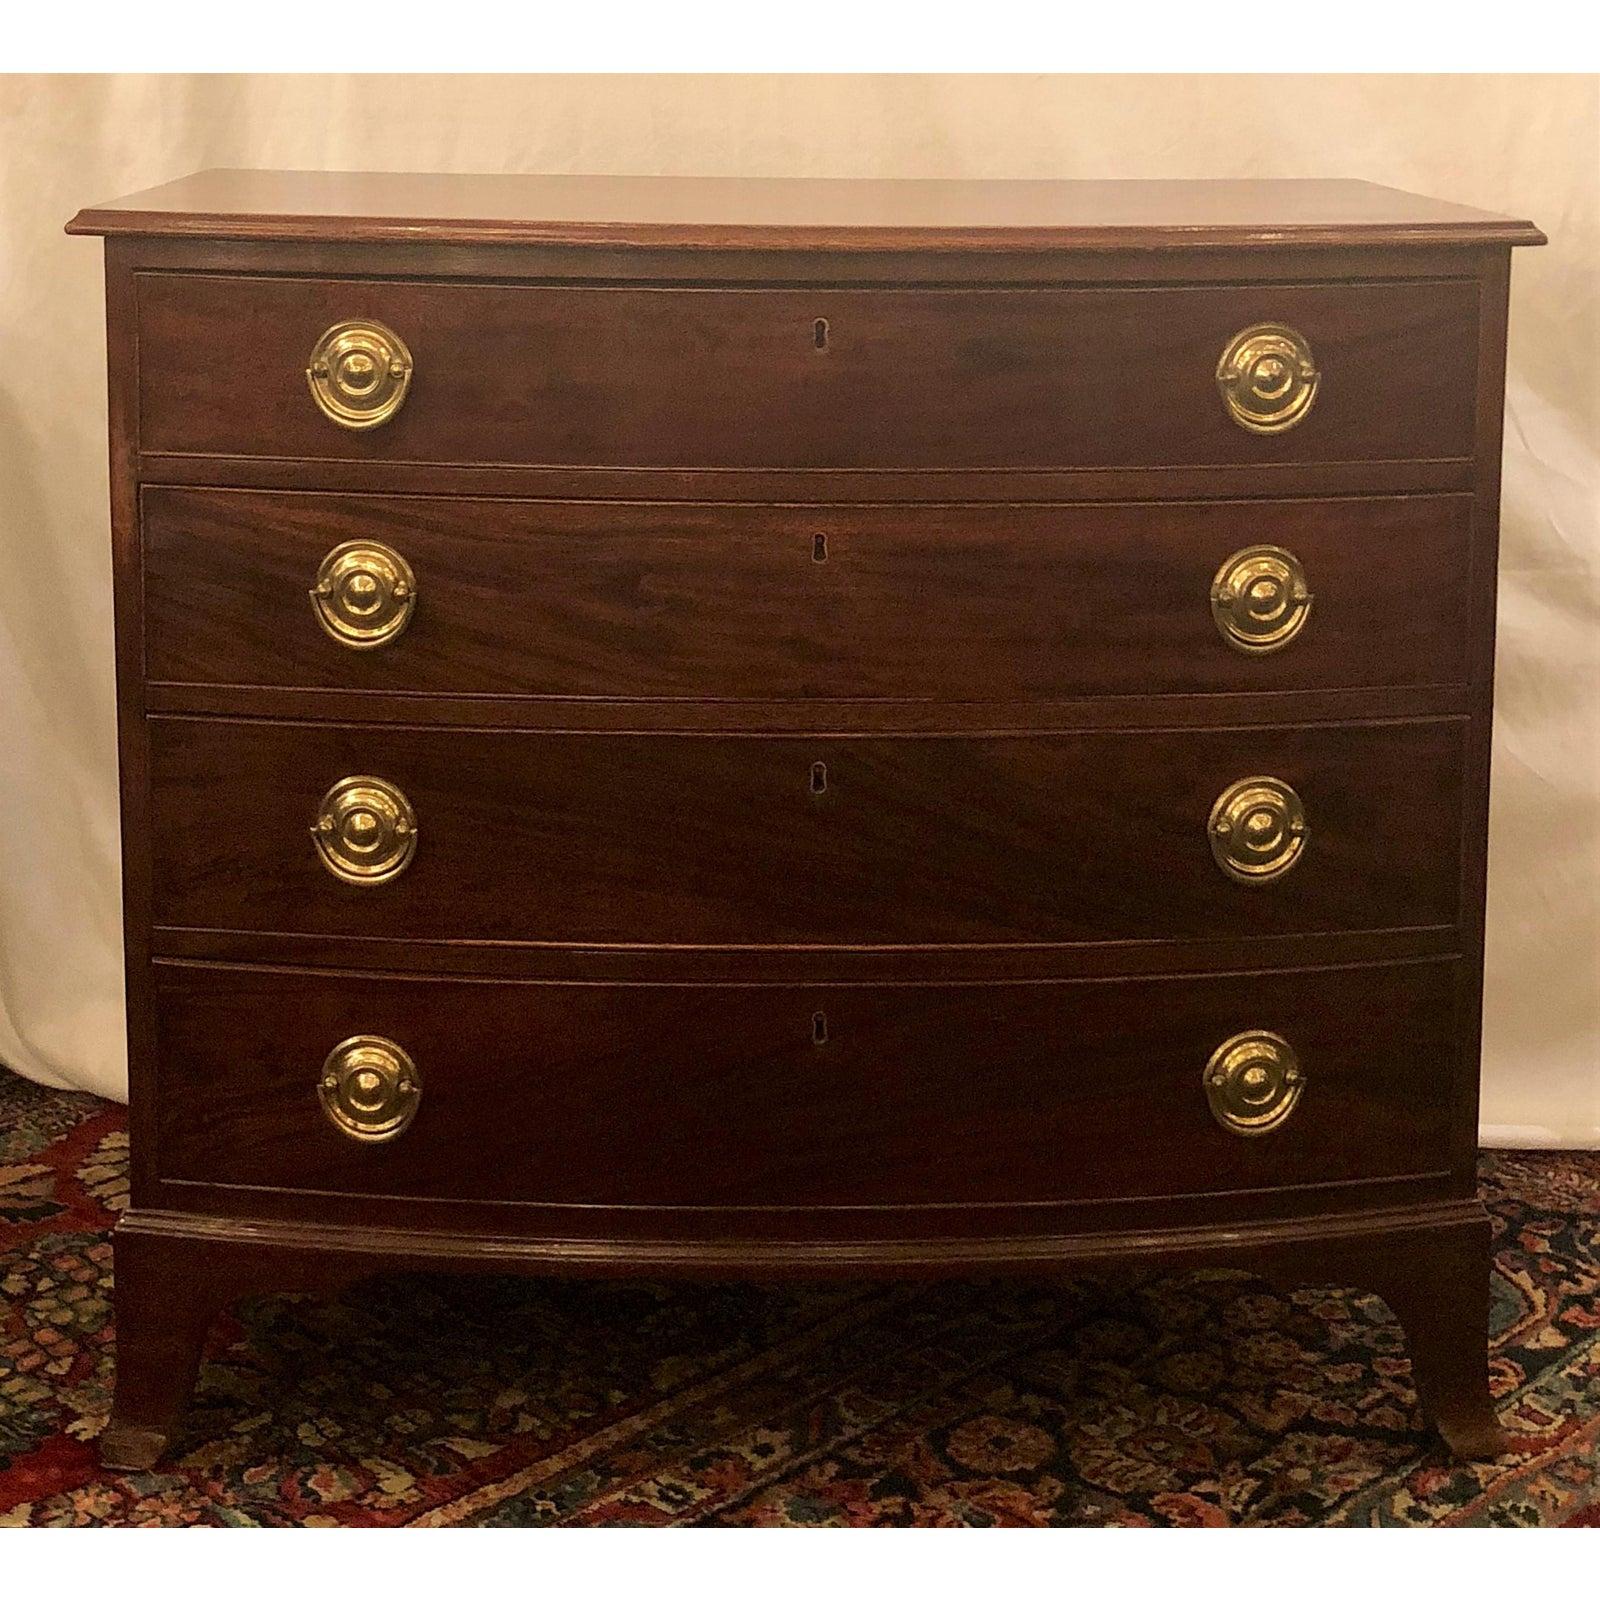 Antique American 18th Century Mahogany Bow-Front Chest of Drawers, circa 1780 In Good Condition For Sale In New Orleans, LA